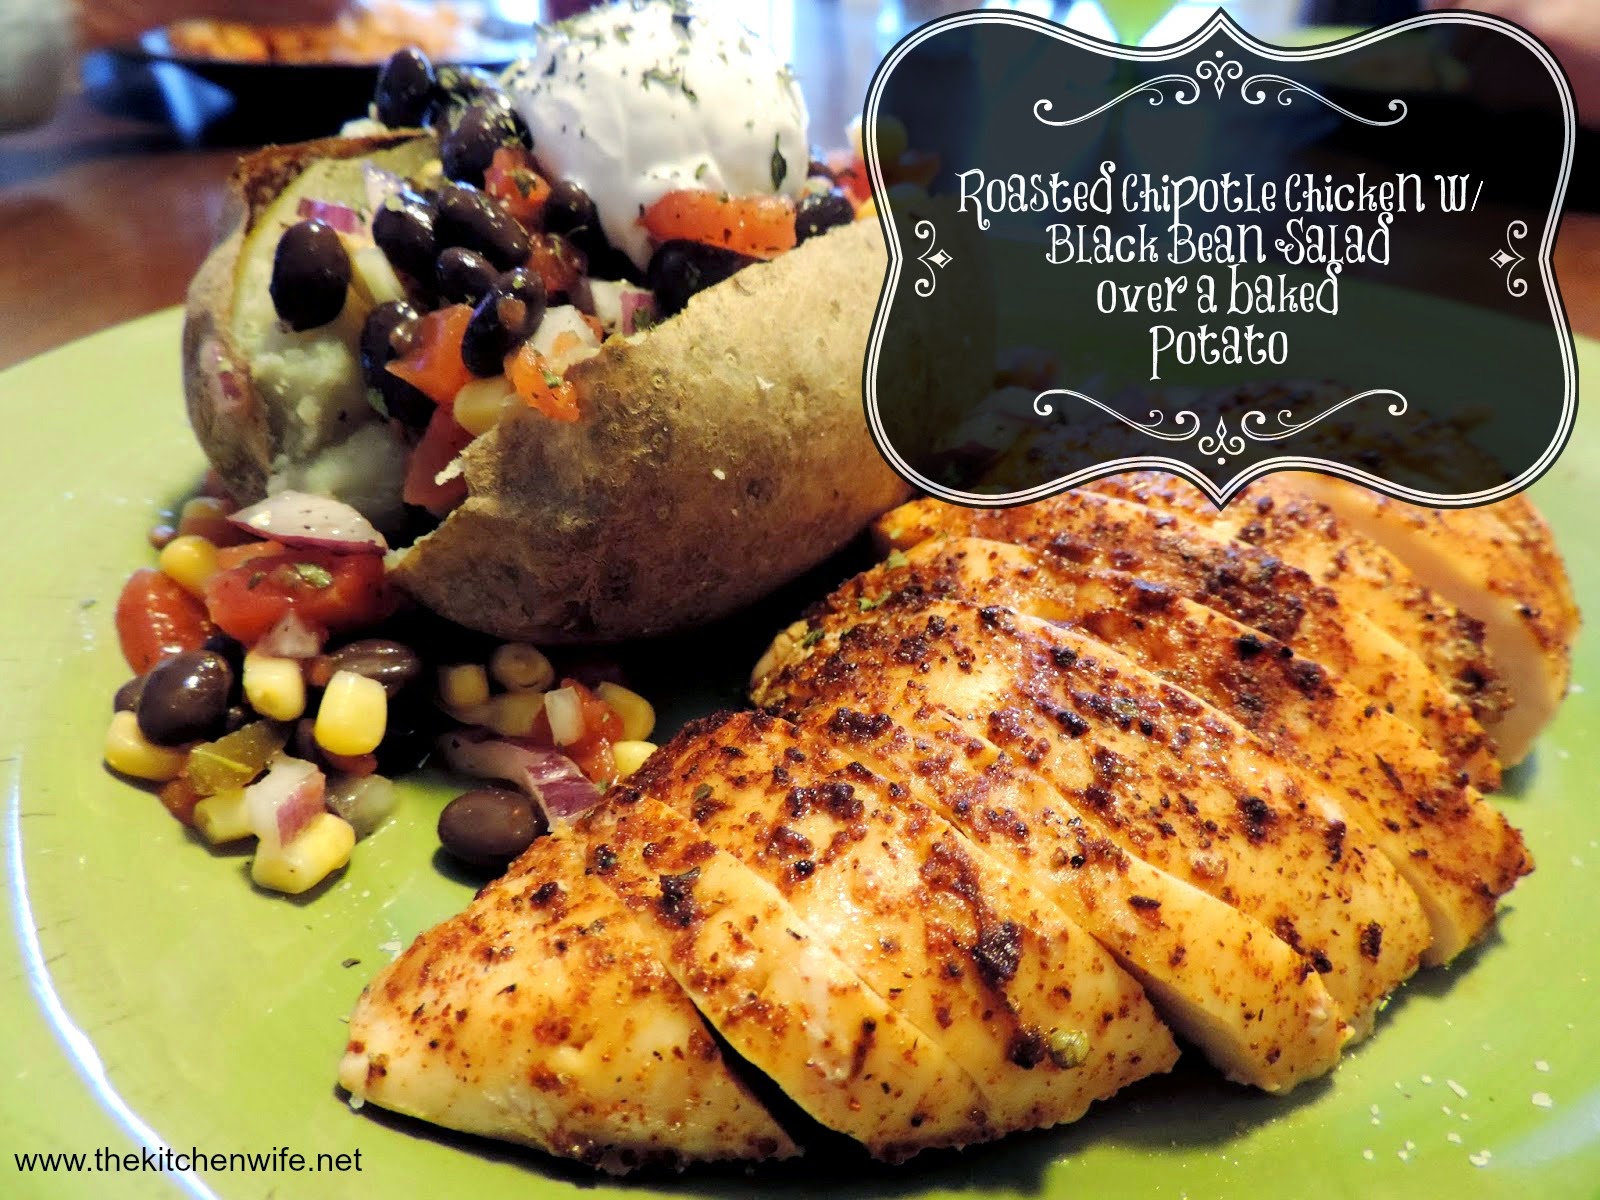 Roasted Chipotle Chicken with Black Bean Salad over a Baked Potato